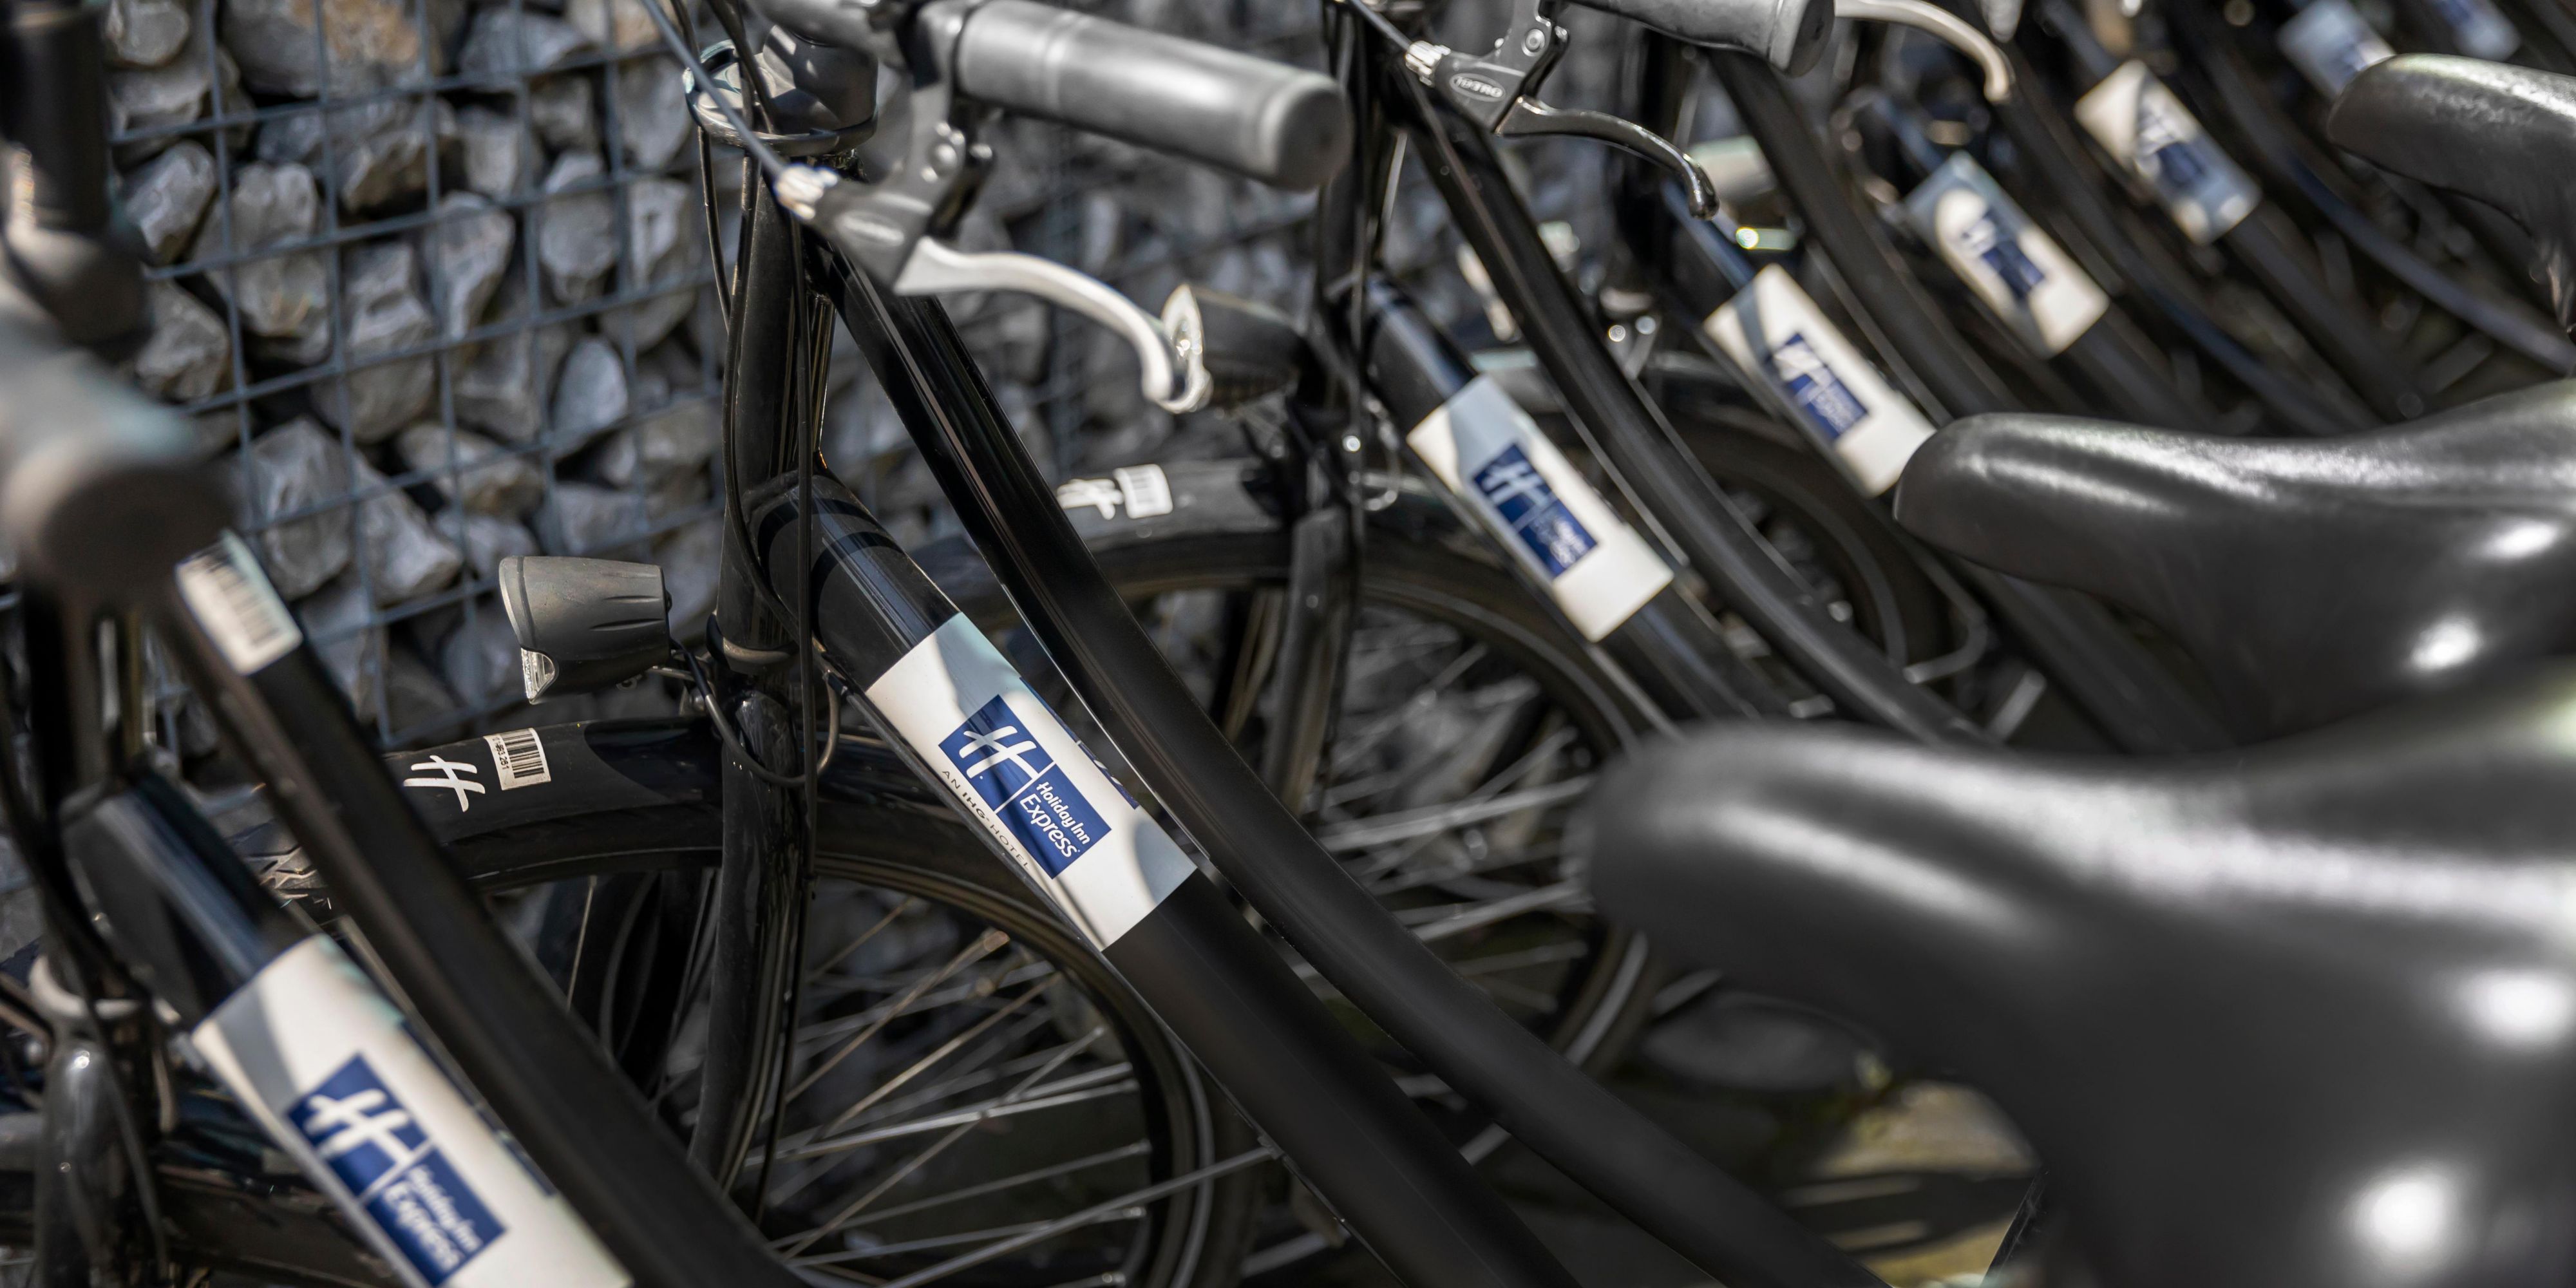 Explore the city of Amsterdam like a local in an eco-friendly, active way. Our bikes are available at our reception. To guarantee availablility, please reserve in advance.